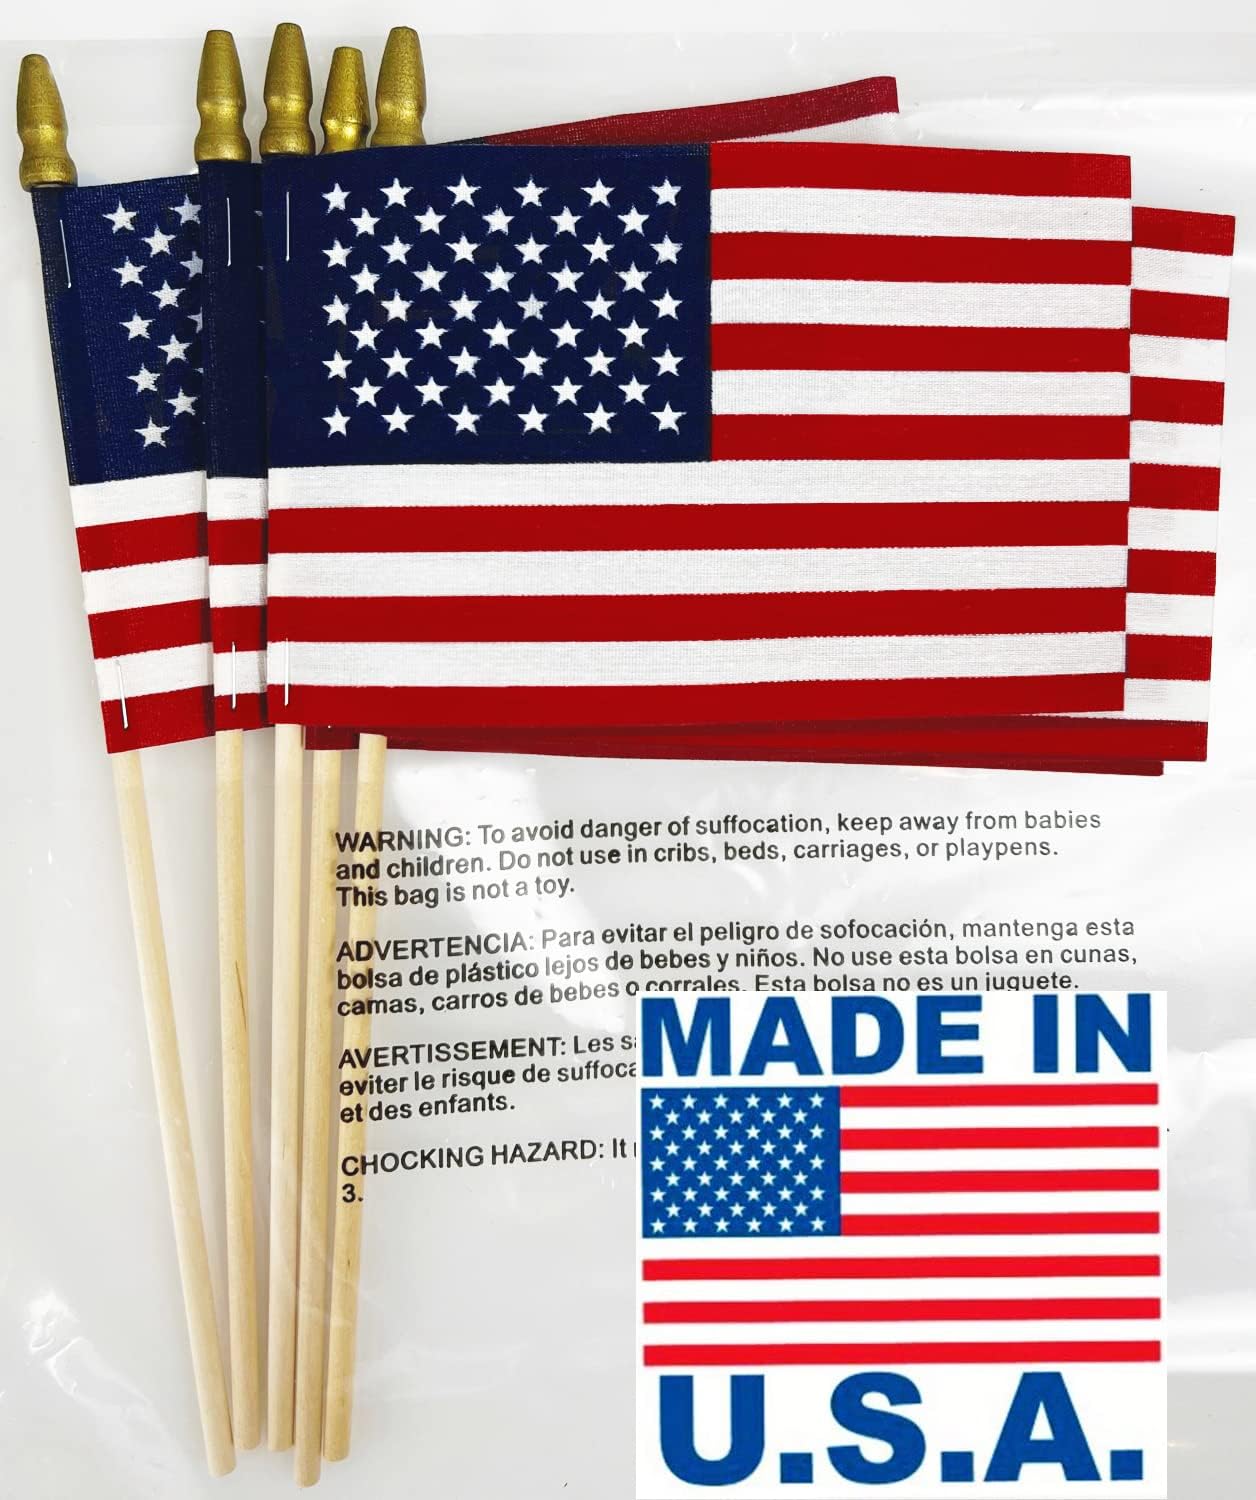 GIFTEXPRESS 12-Pack US Stick Flags with Spear Tip, Made in USA (12*18 Inch )